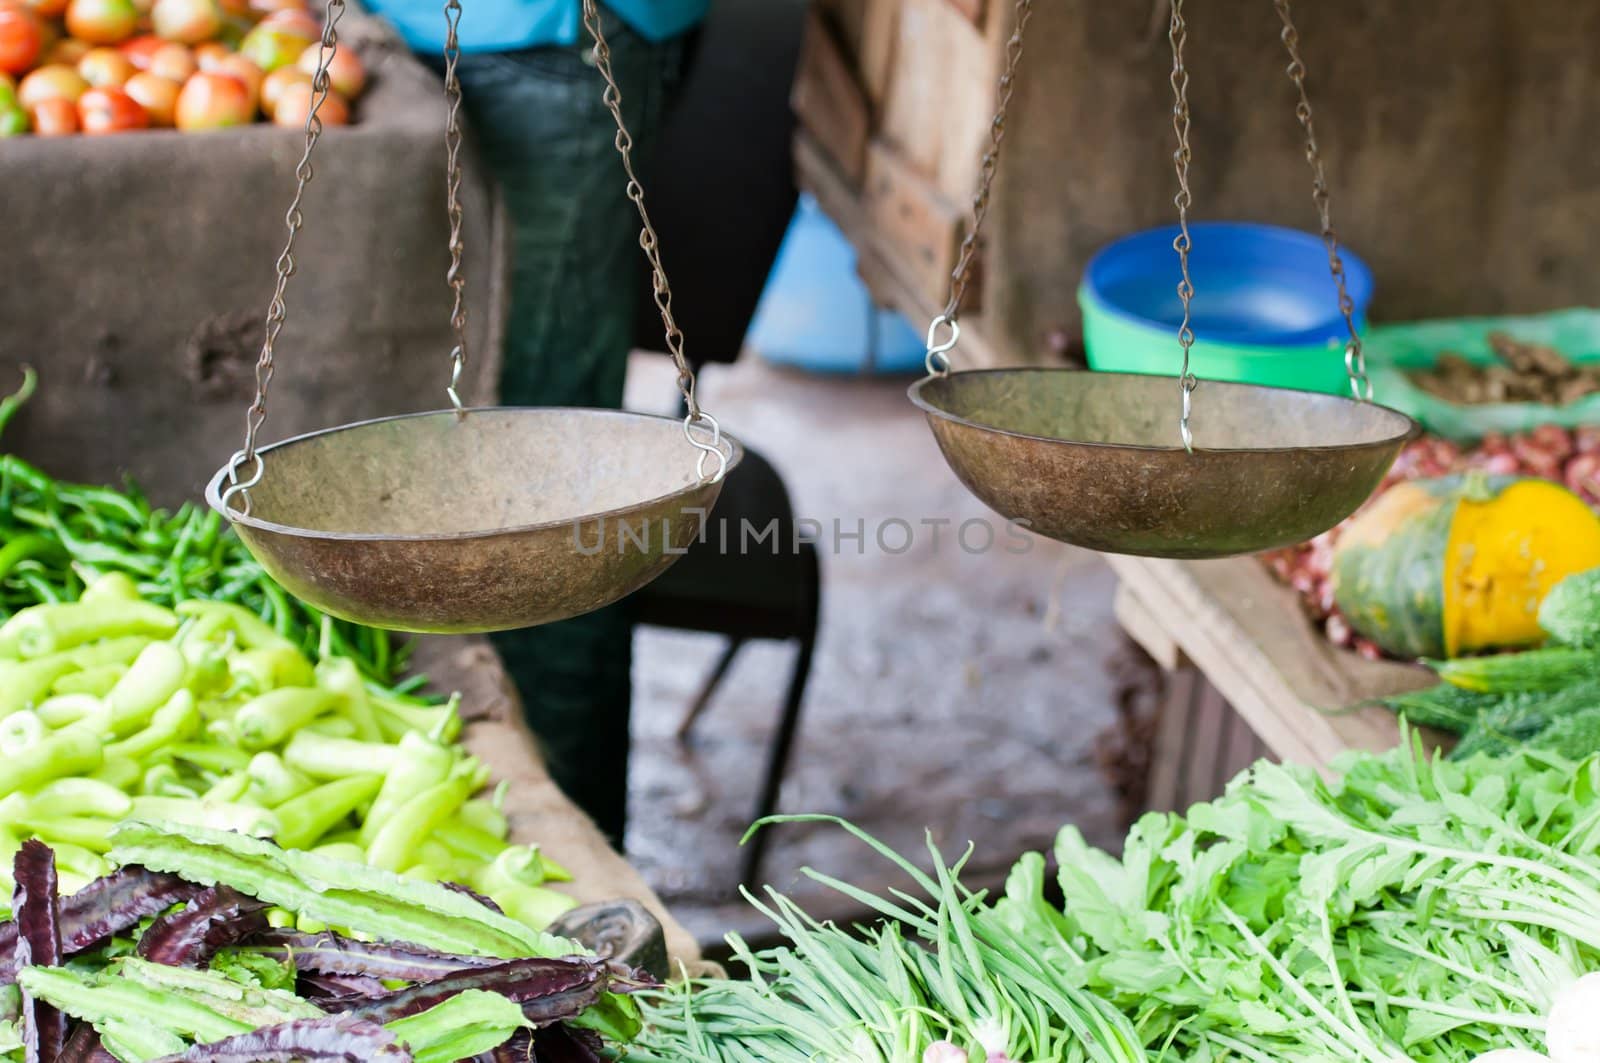 Old scales on open market with vegetables on shelves. Selective focus on the scales.